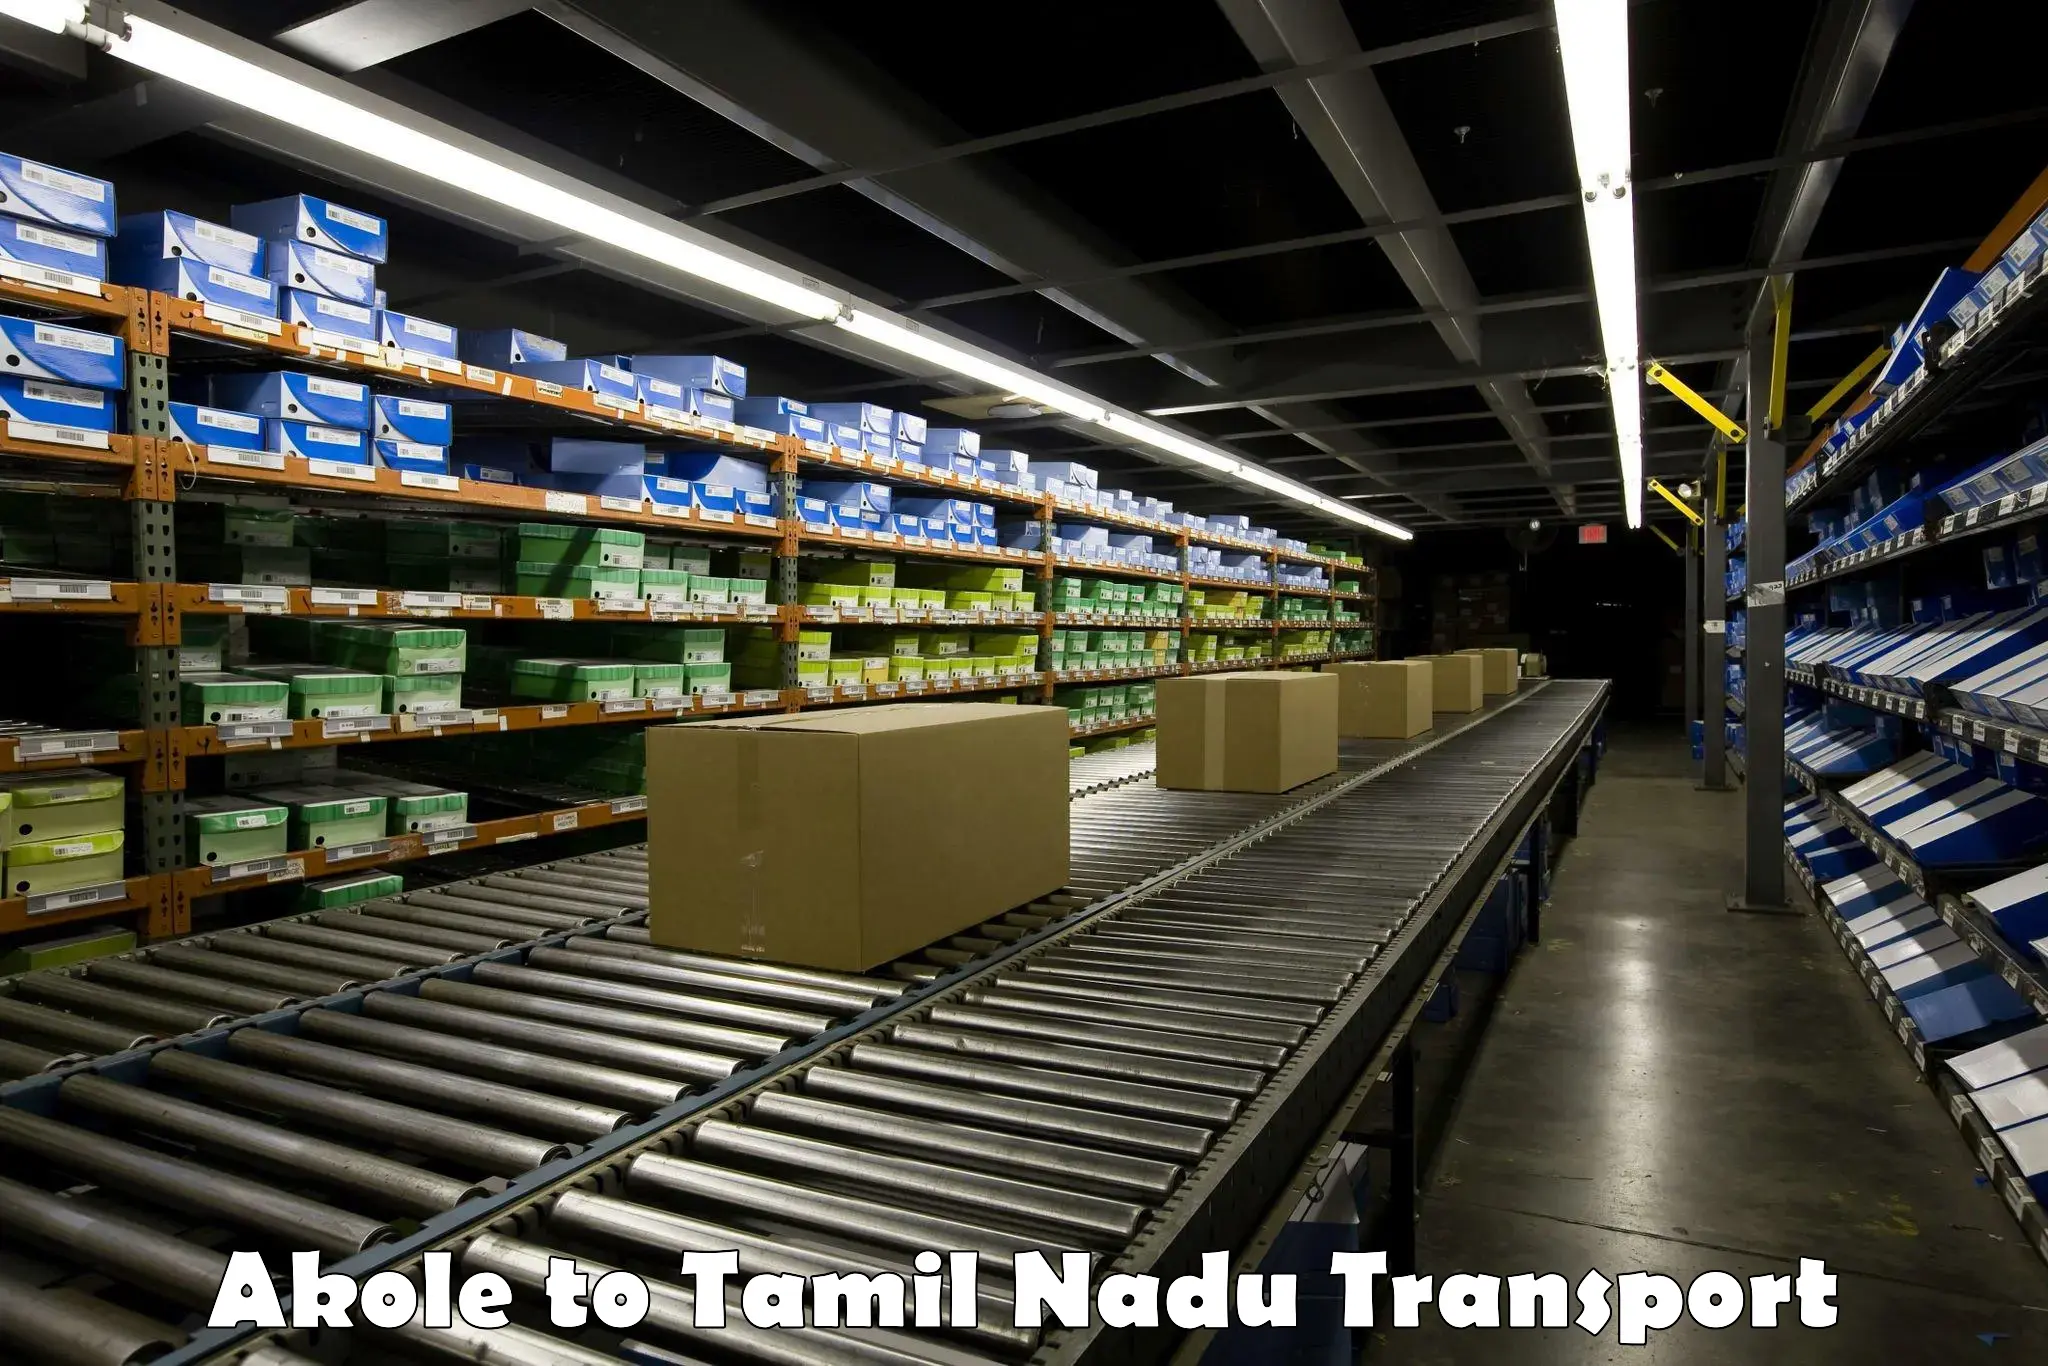 Nationwide transport services Akole to Vellore Institute of Technology